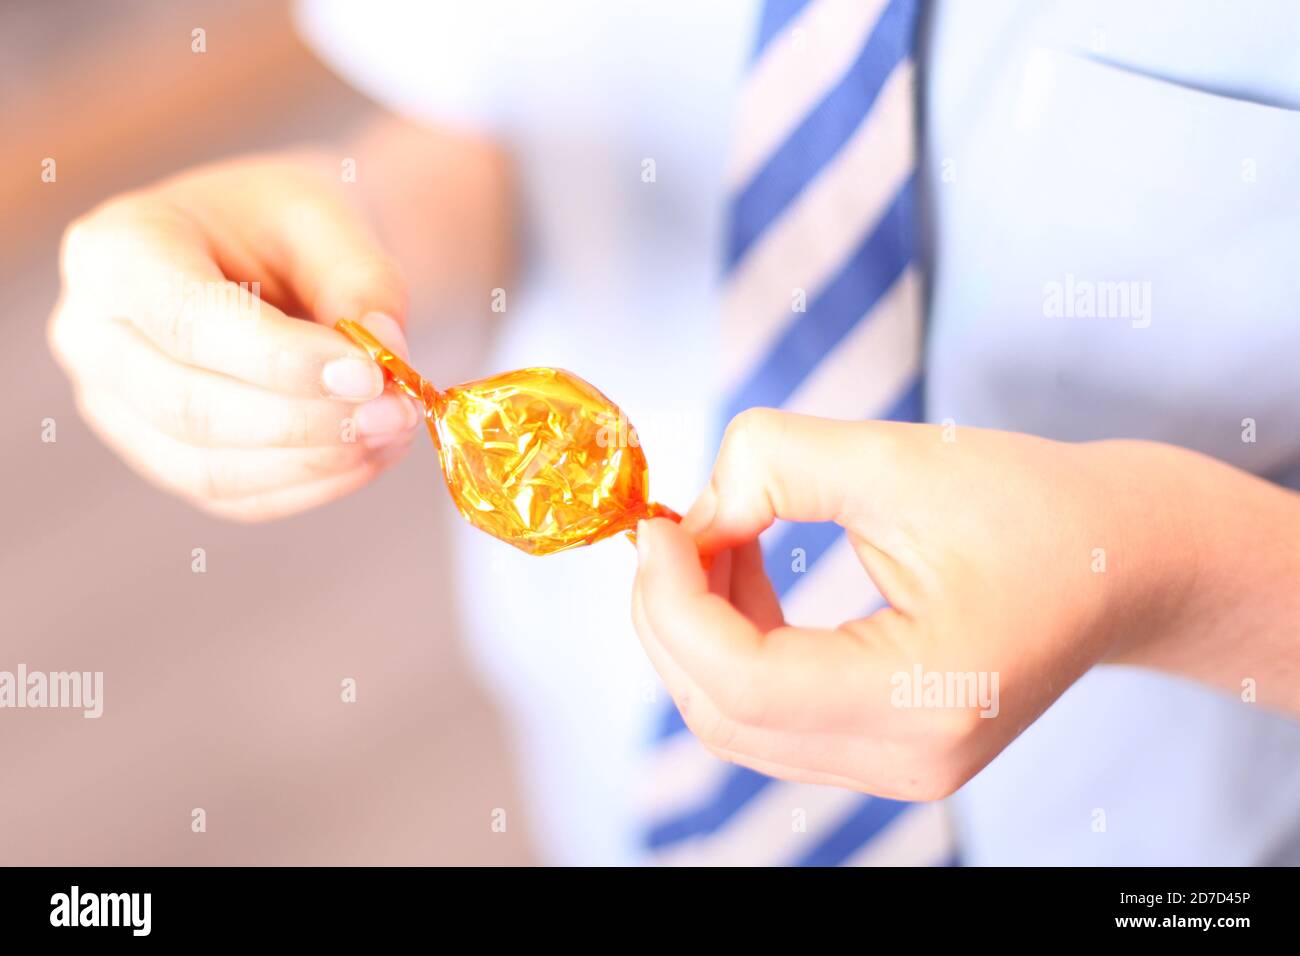 Child unwrapping Quality Street Toffee Penny wrapped sweet in wrapper, close up Stock Photo